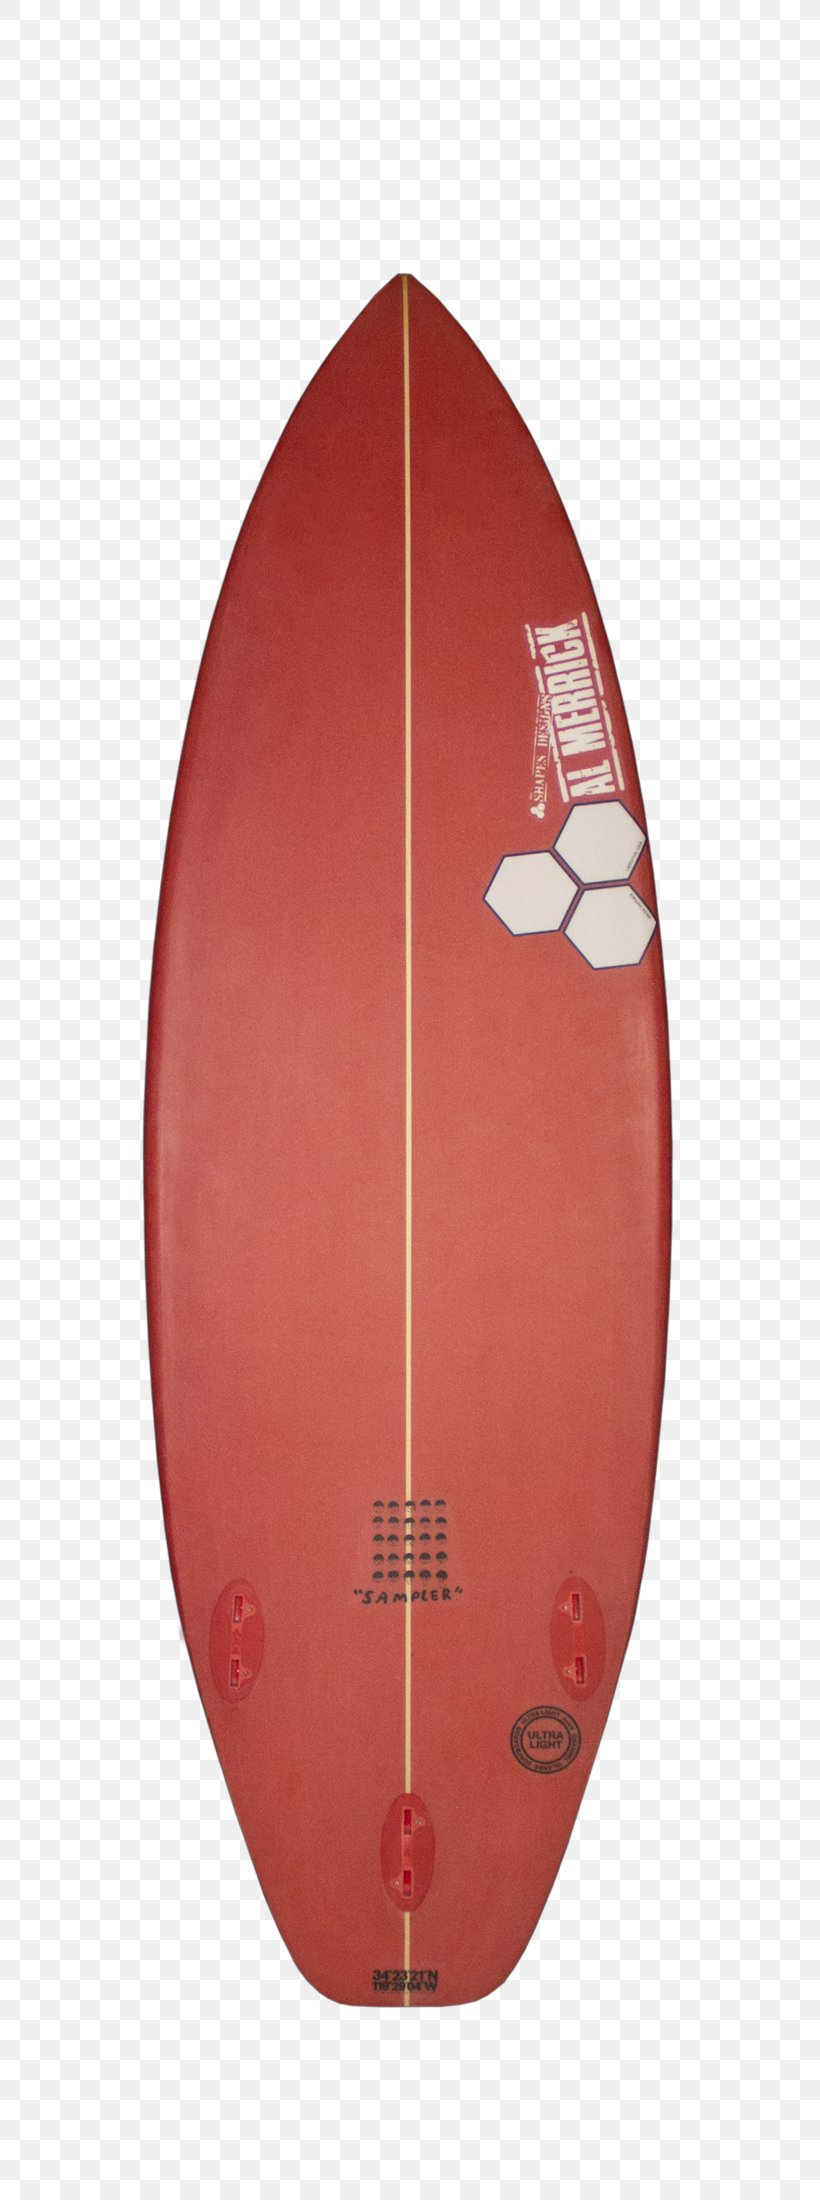 Surfboard, PNG, 600x2200px, Surfboard, Surfing Equipment And Supplies Download Free